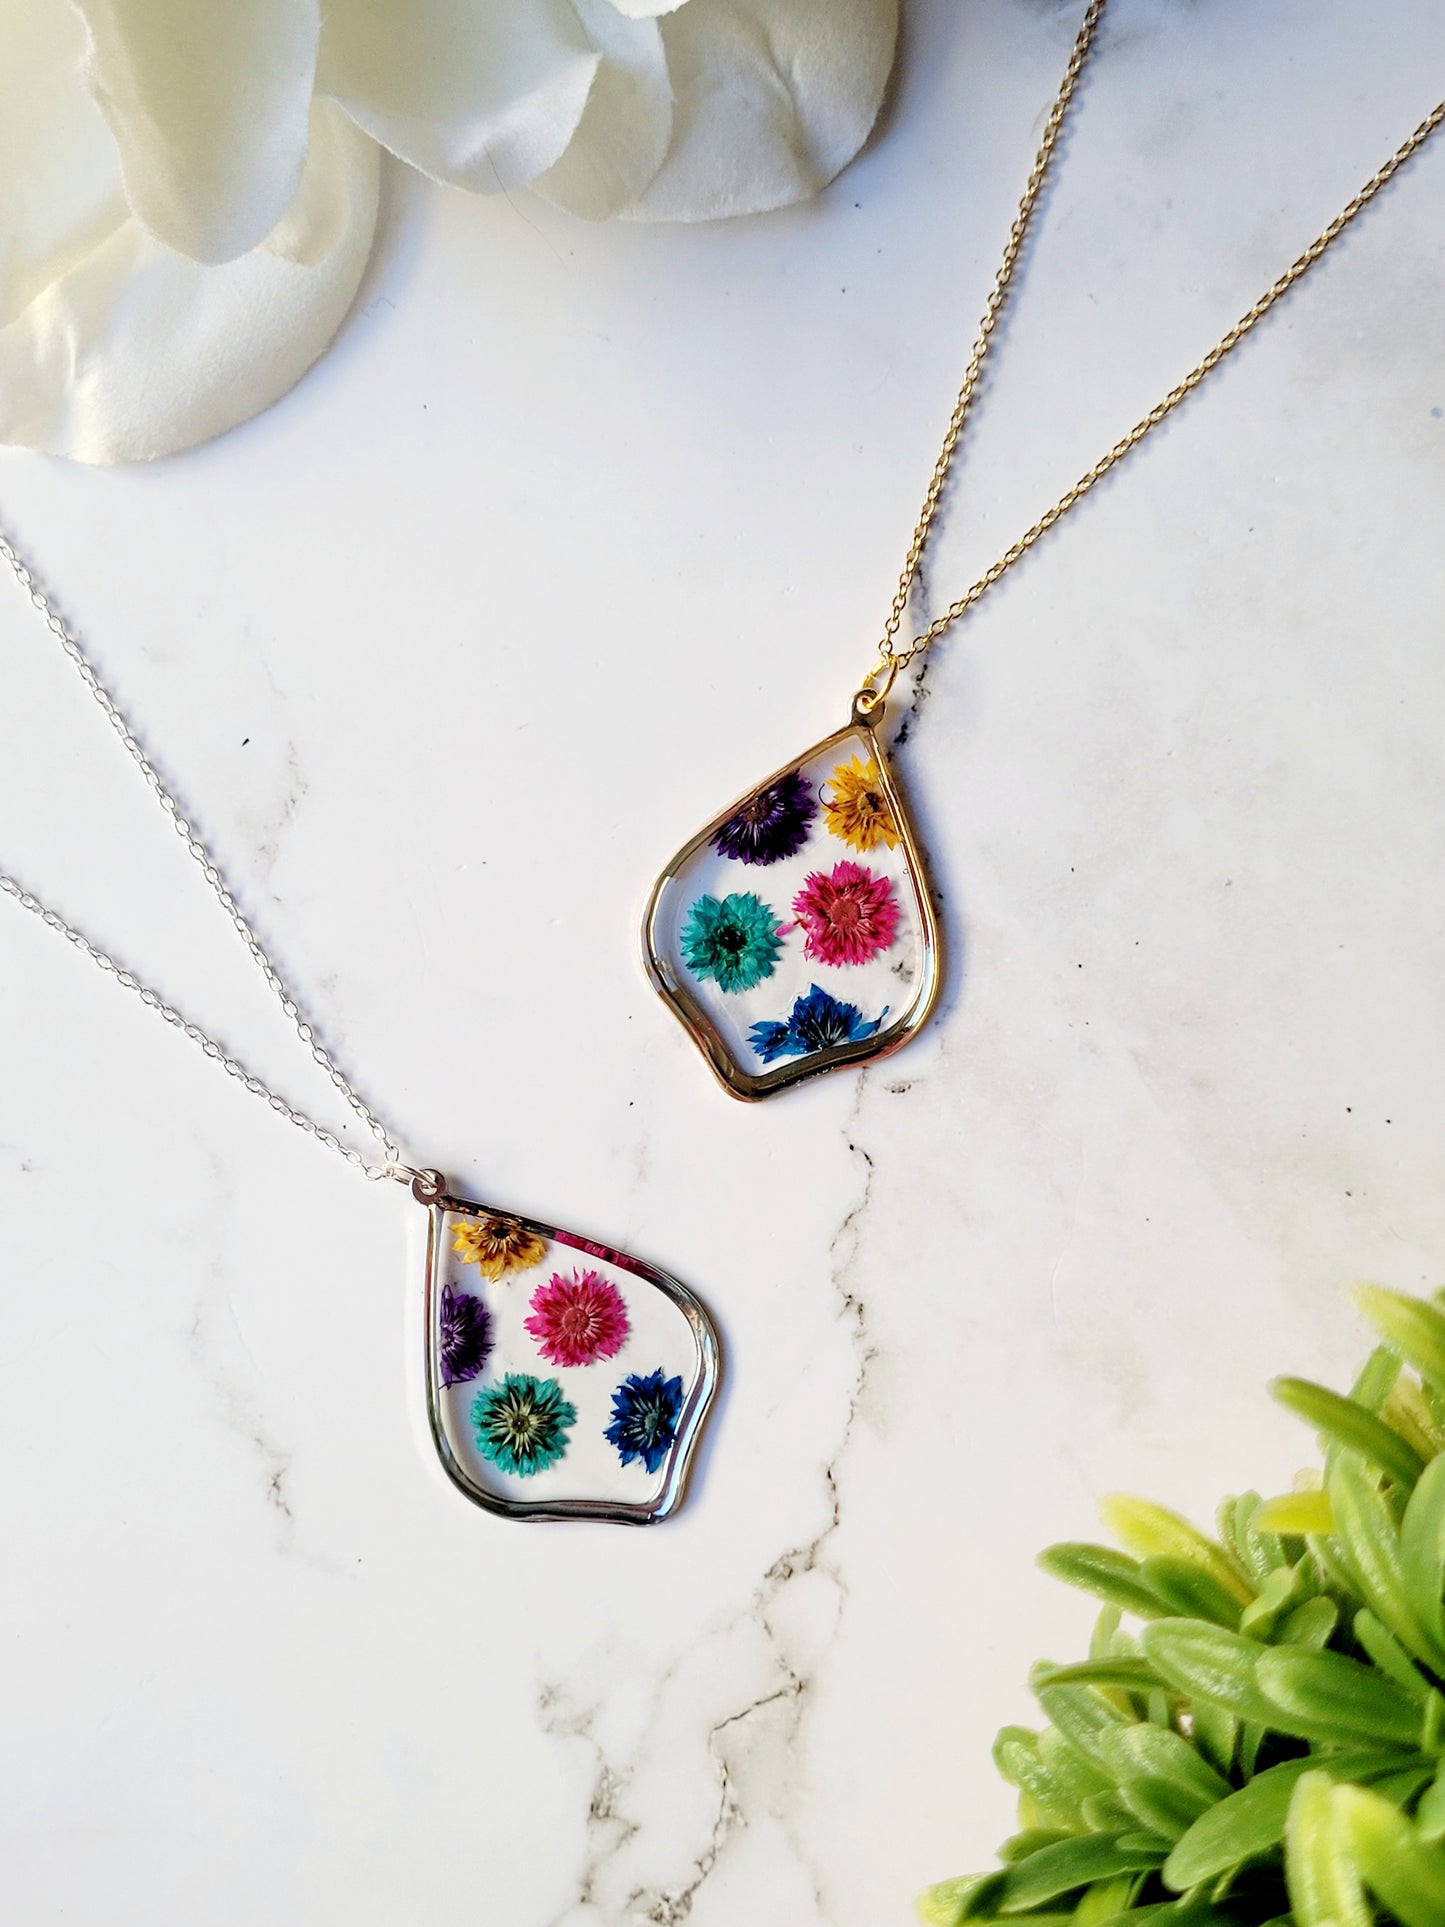 close up of scalloped resin necklace with rainbow dried flowers on a marble background surrounded by foliage.